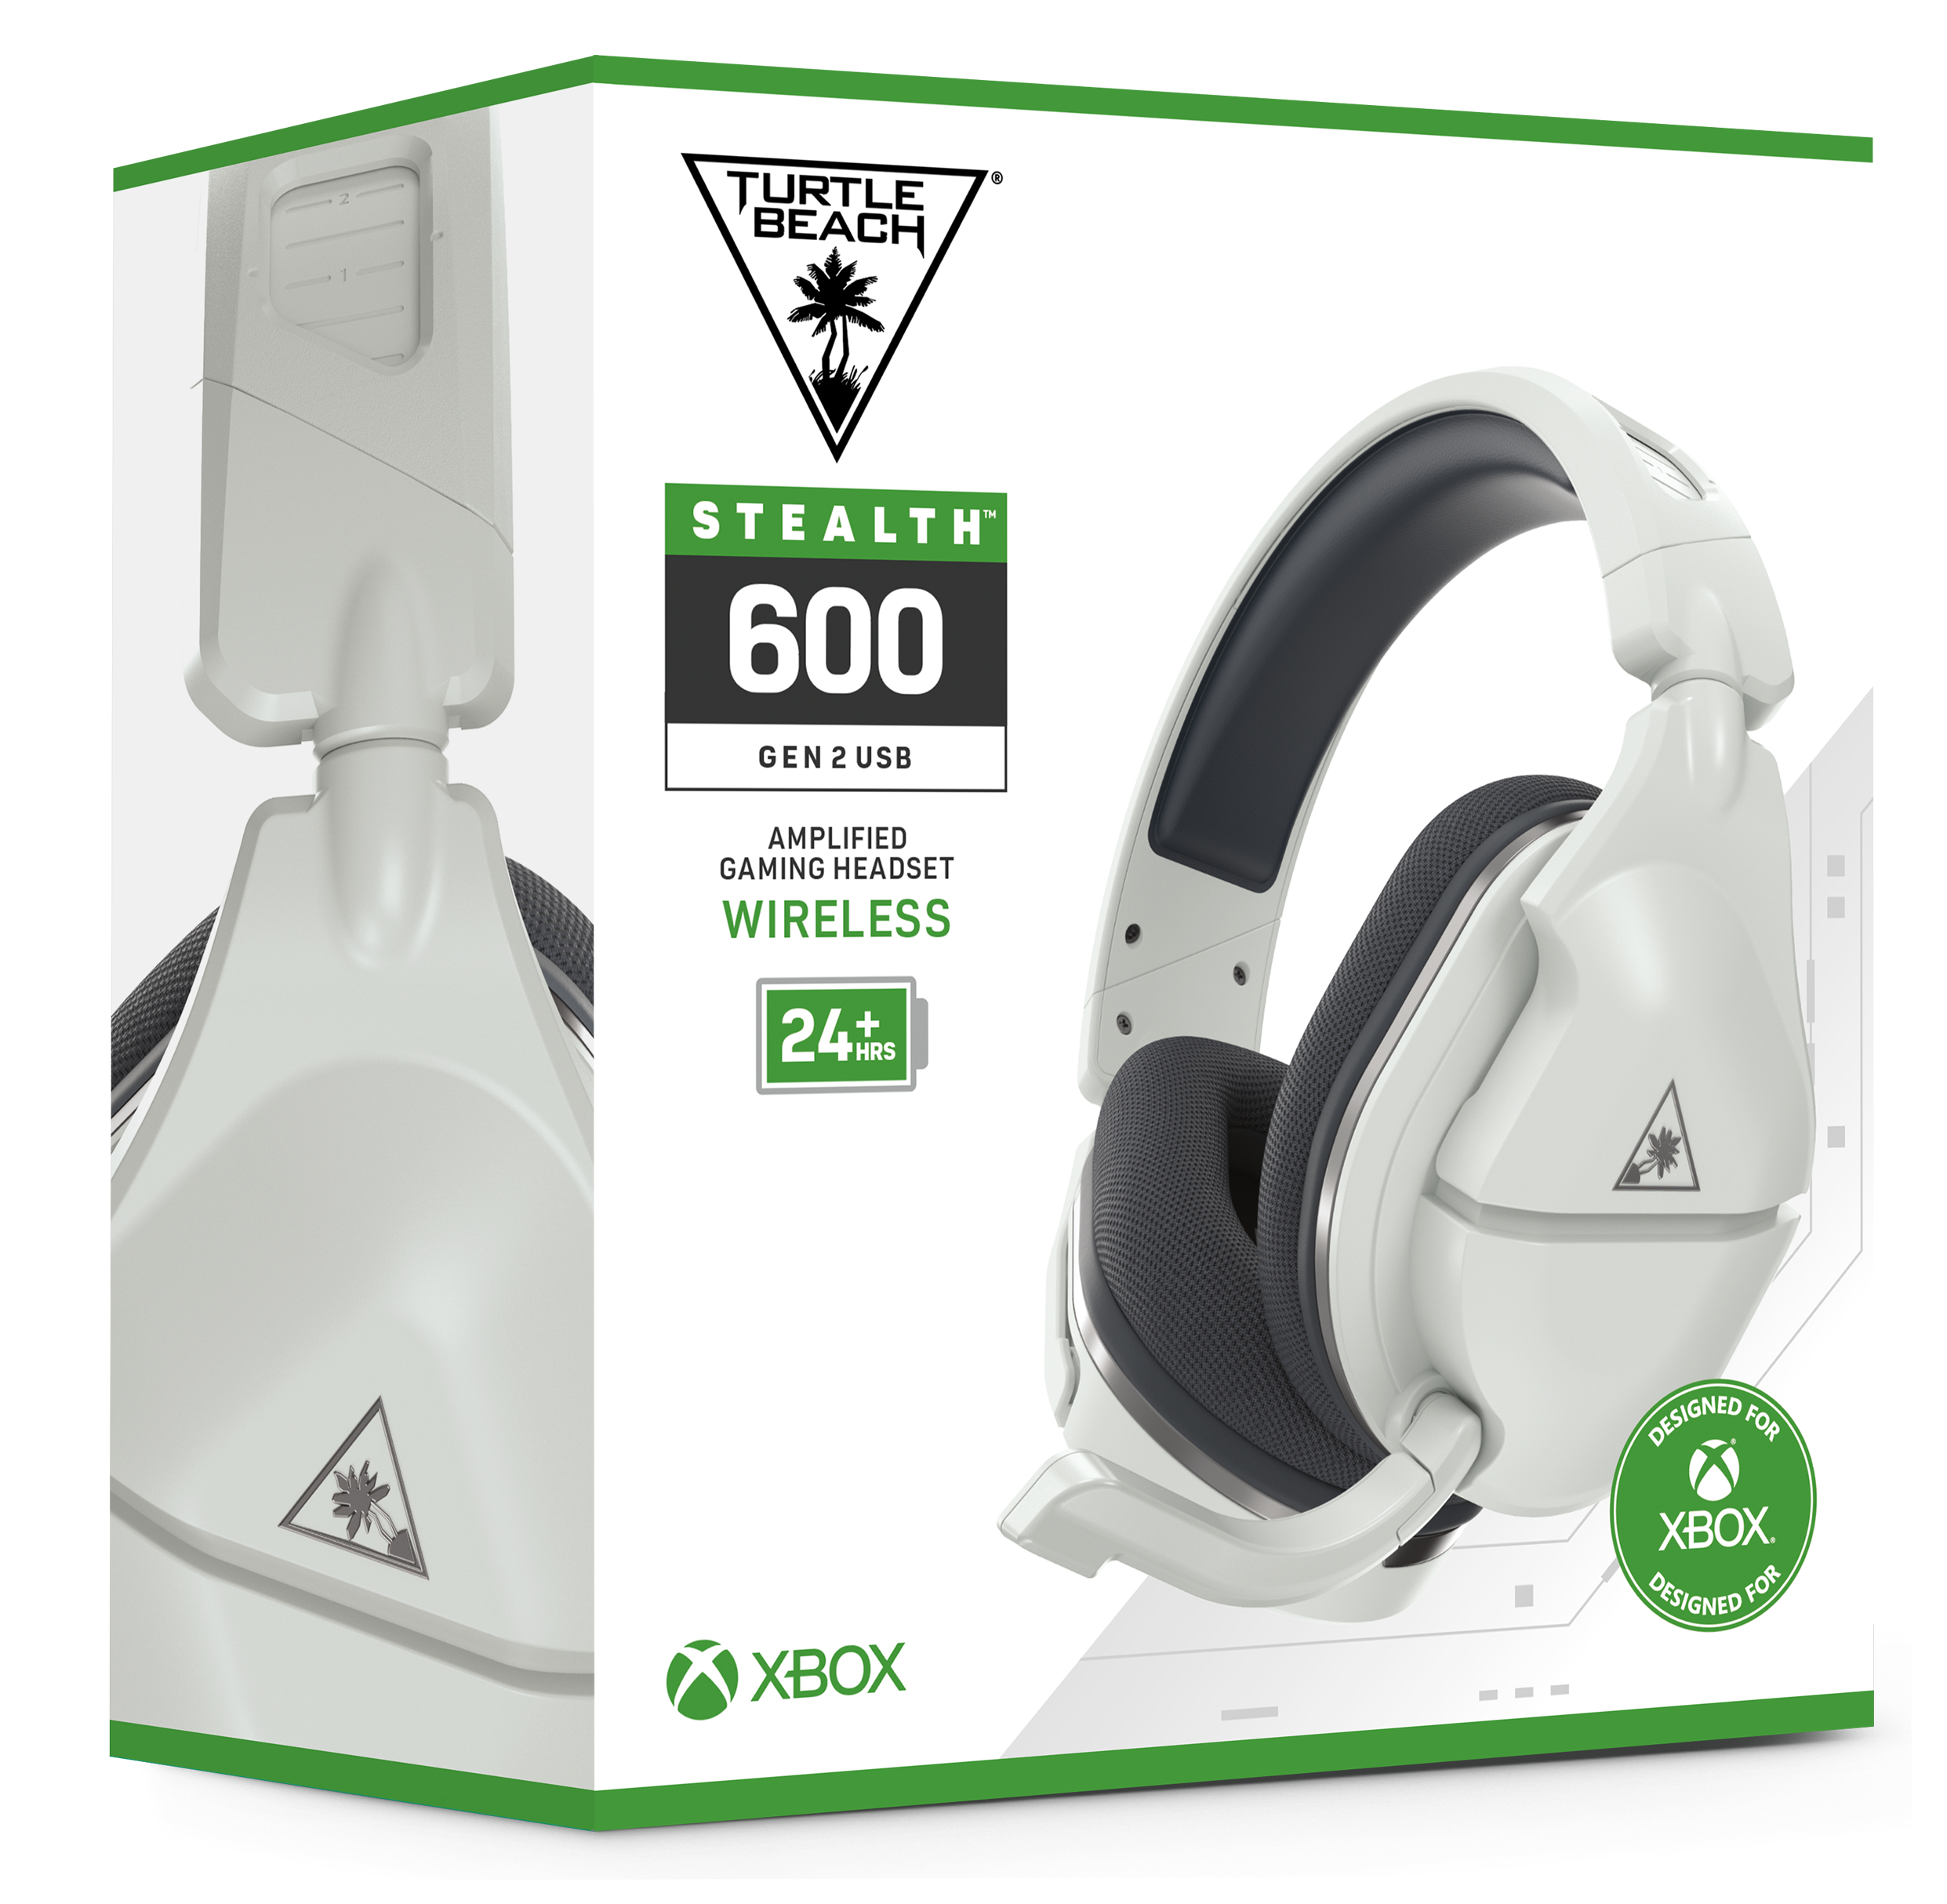 Adviseur Literatuur tiener Turtle Beach Reveals the New Stealth 600 Gen 2 MAX and Stealth 600 Gen 2  USB Wireless Gaming Headsets | Business Wire